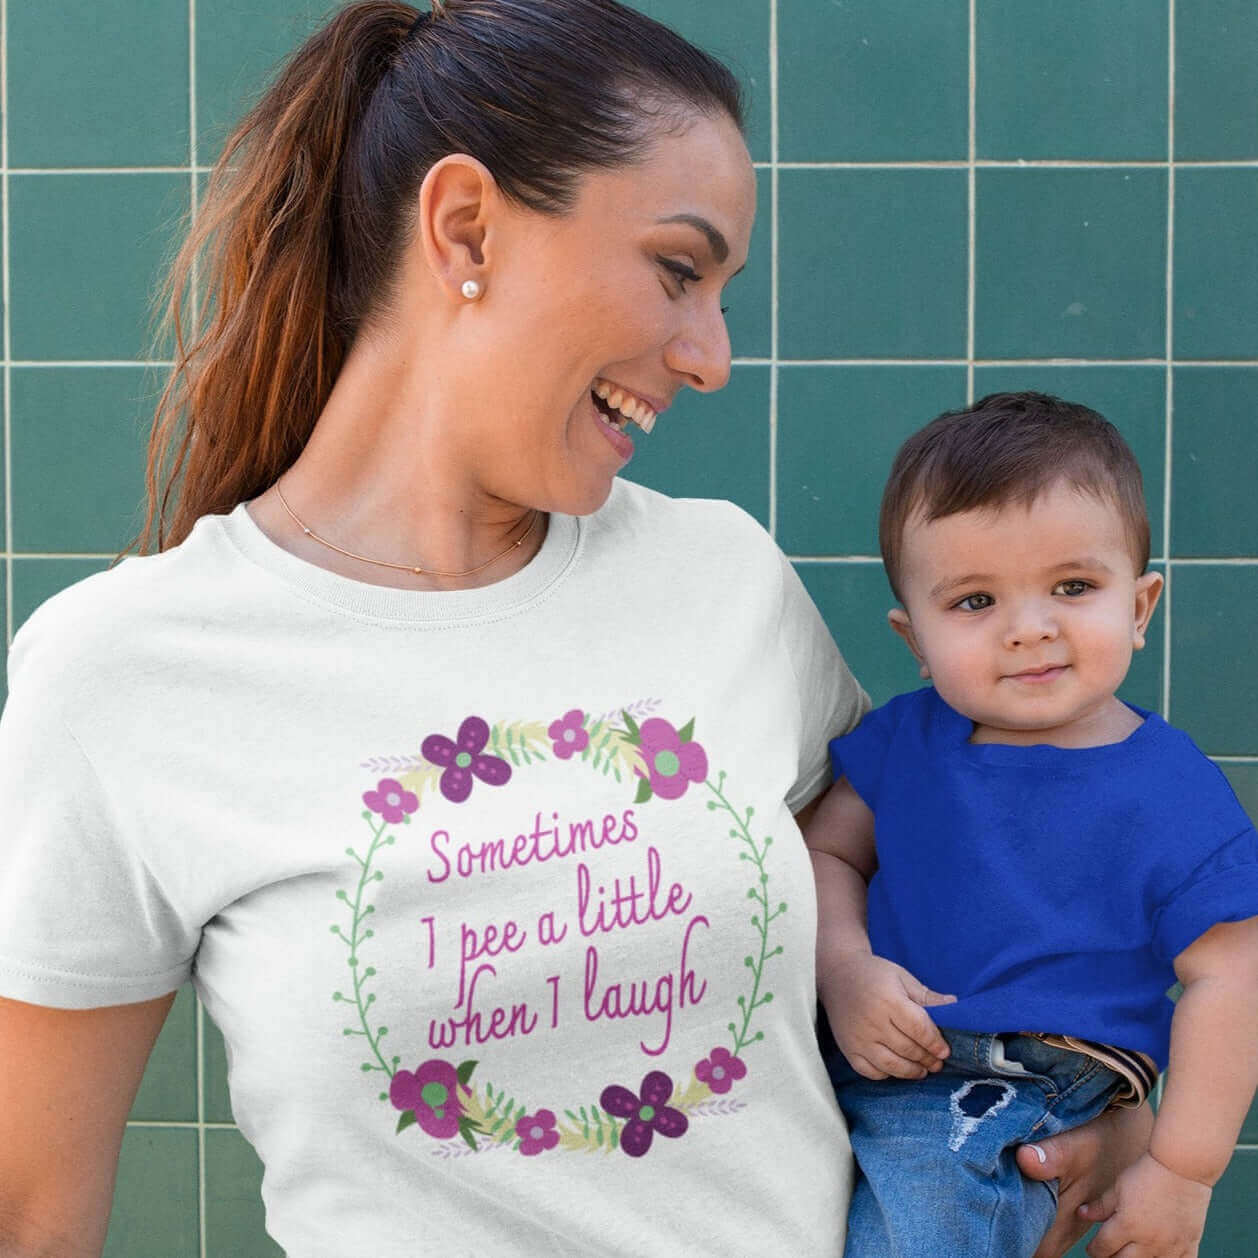 mom wearing tshirt sometimes i pee a little when i laugh witticismsrus